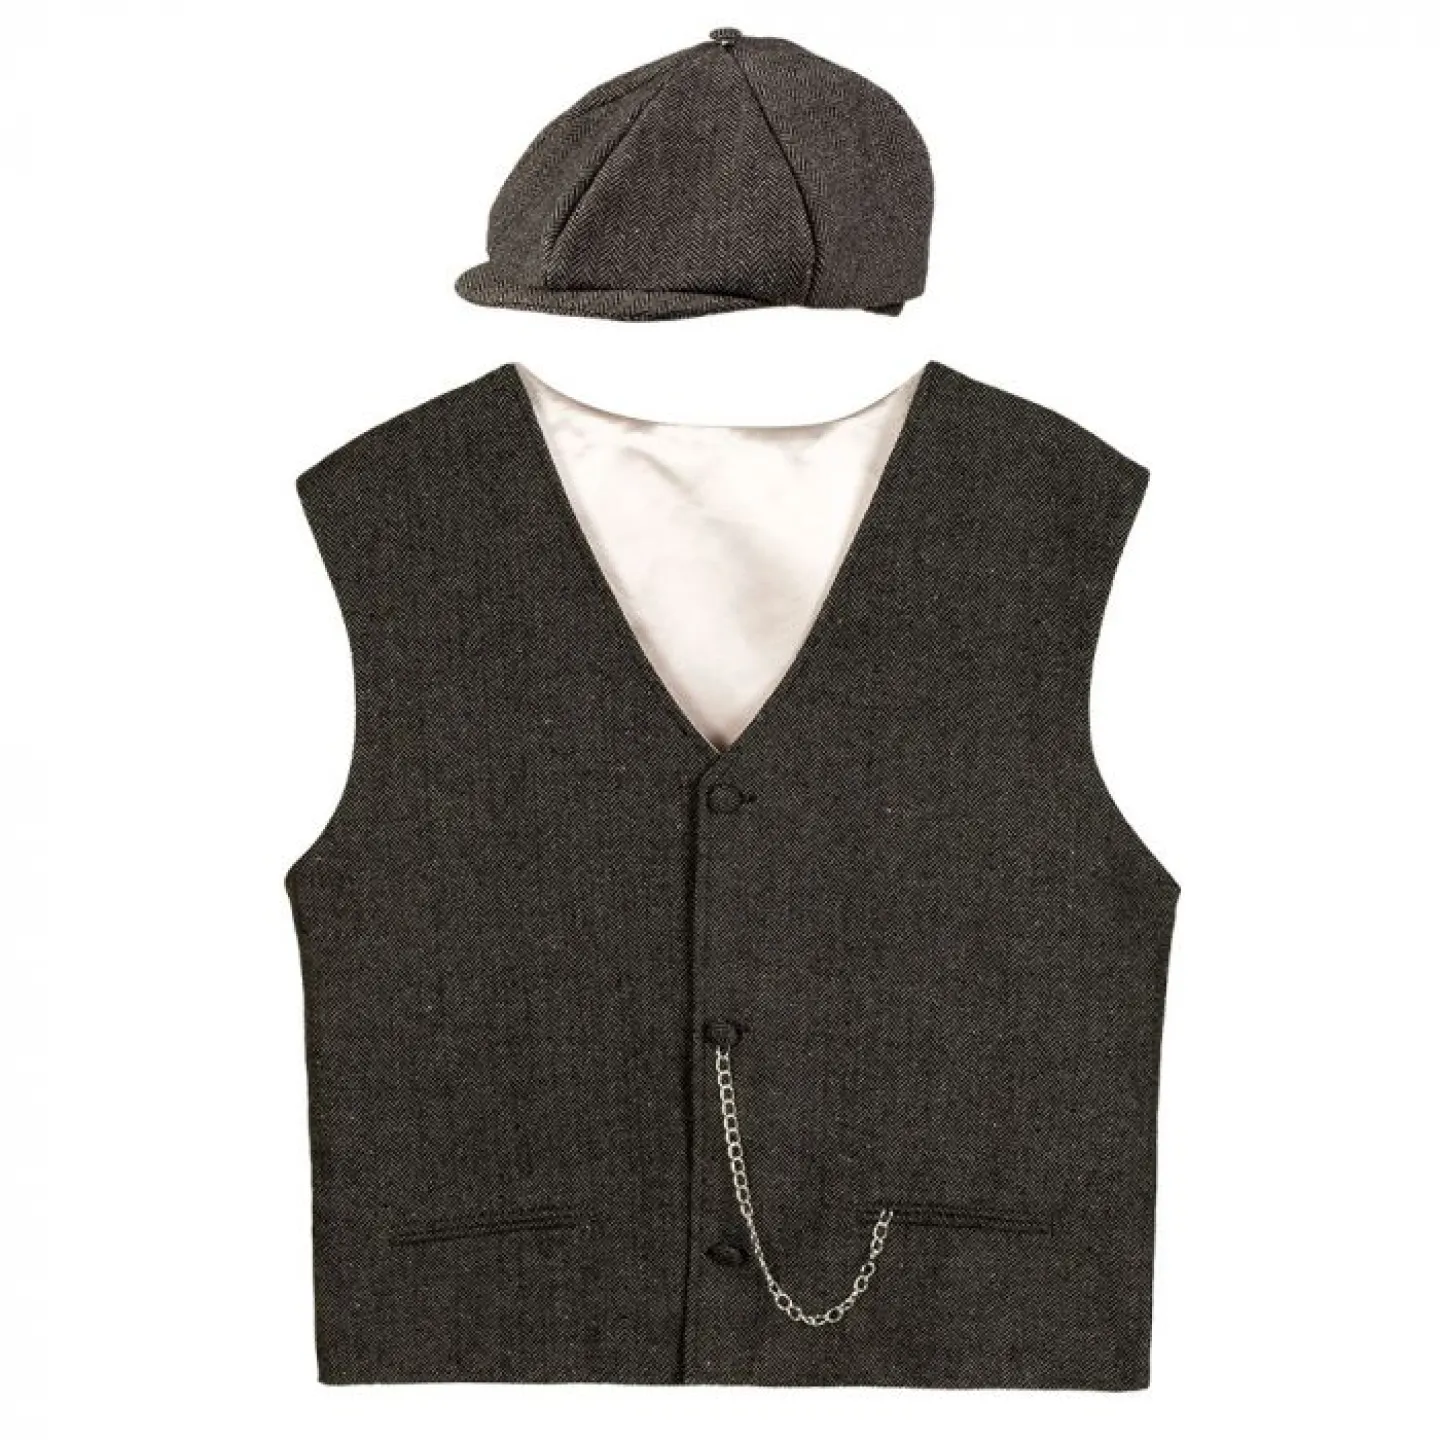 Carnaval accessoireset Peaky Blinders outfit.